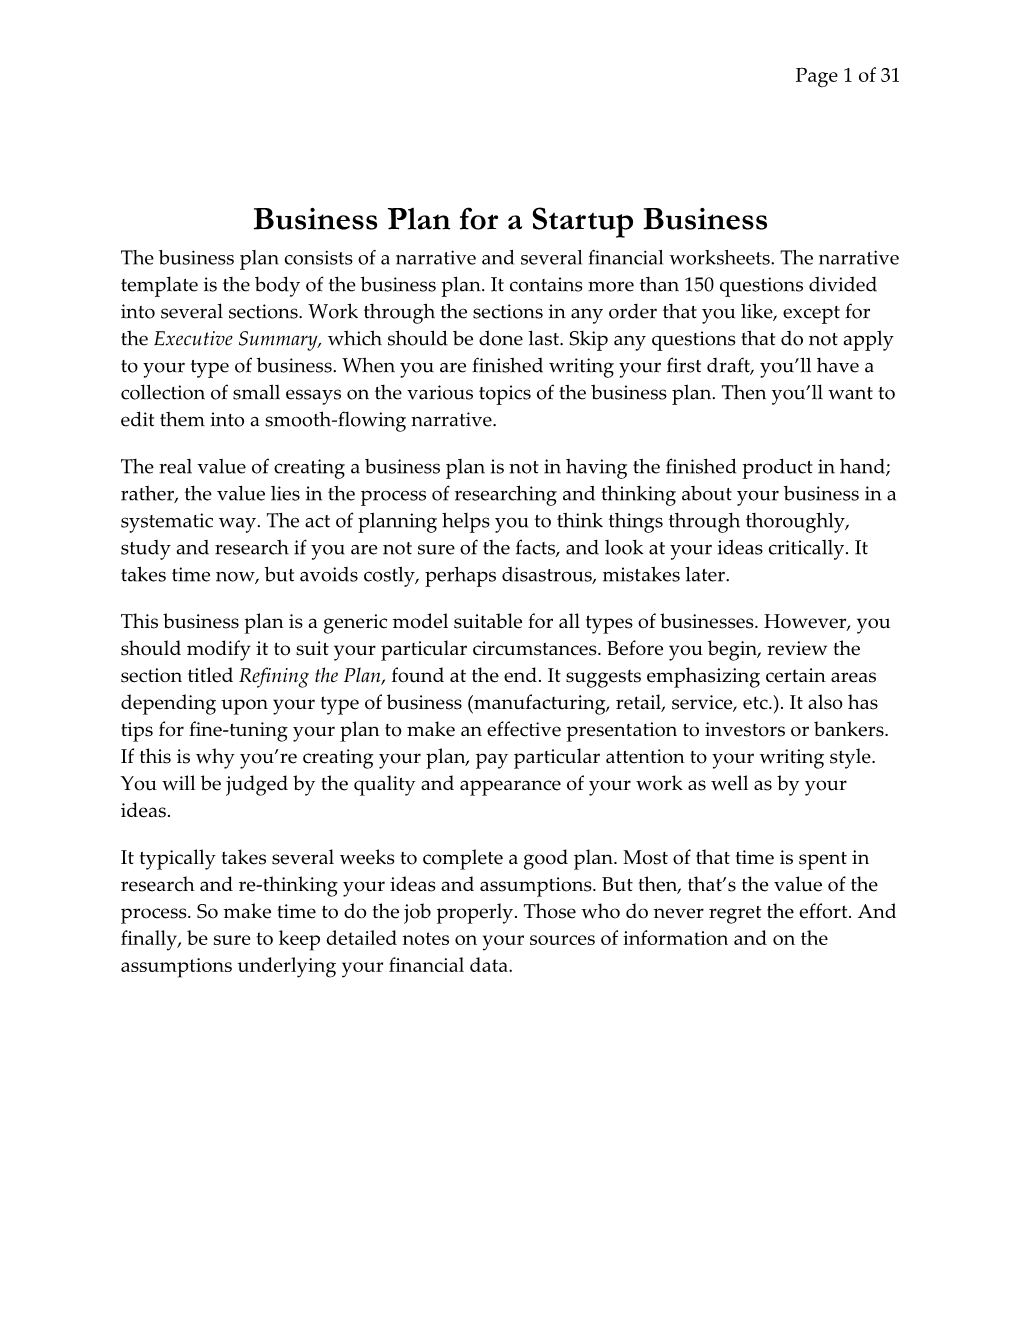 Business Plan for a Startup Business the Business Plan Consists of a Narrative and Several Financial Worksheets